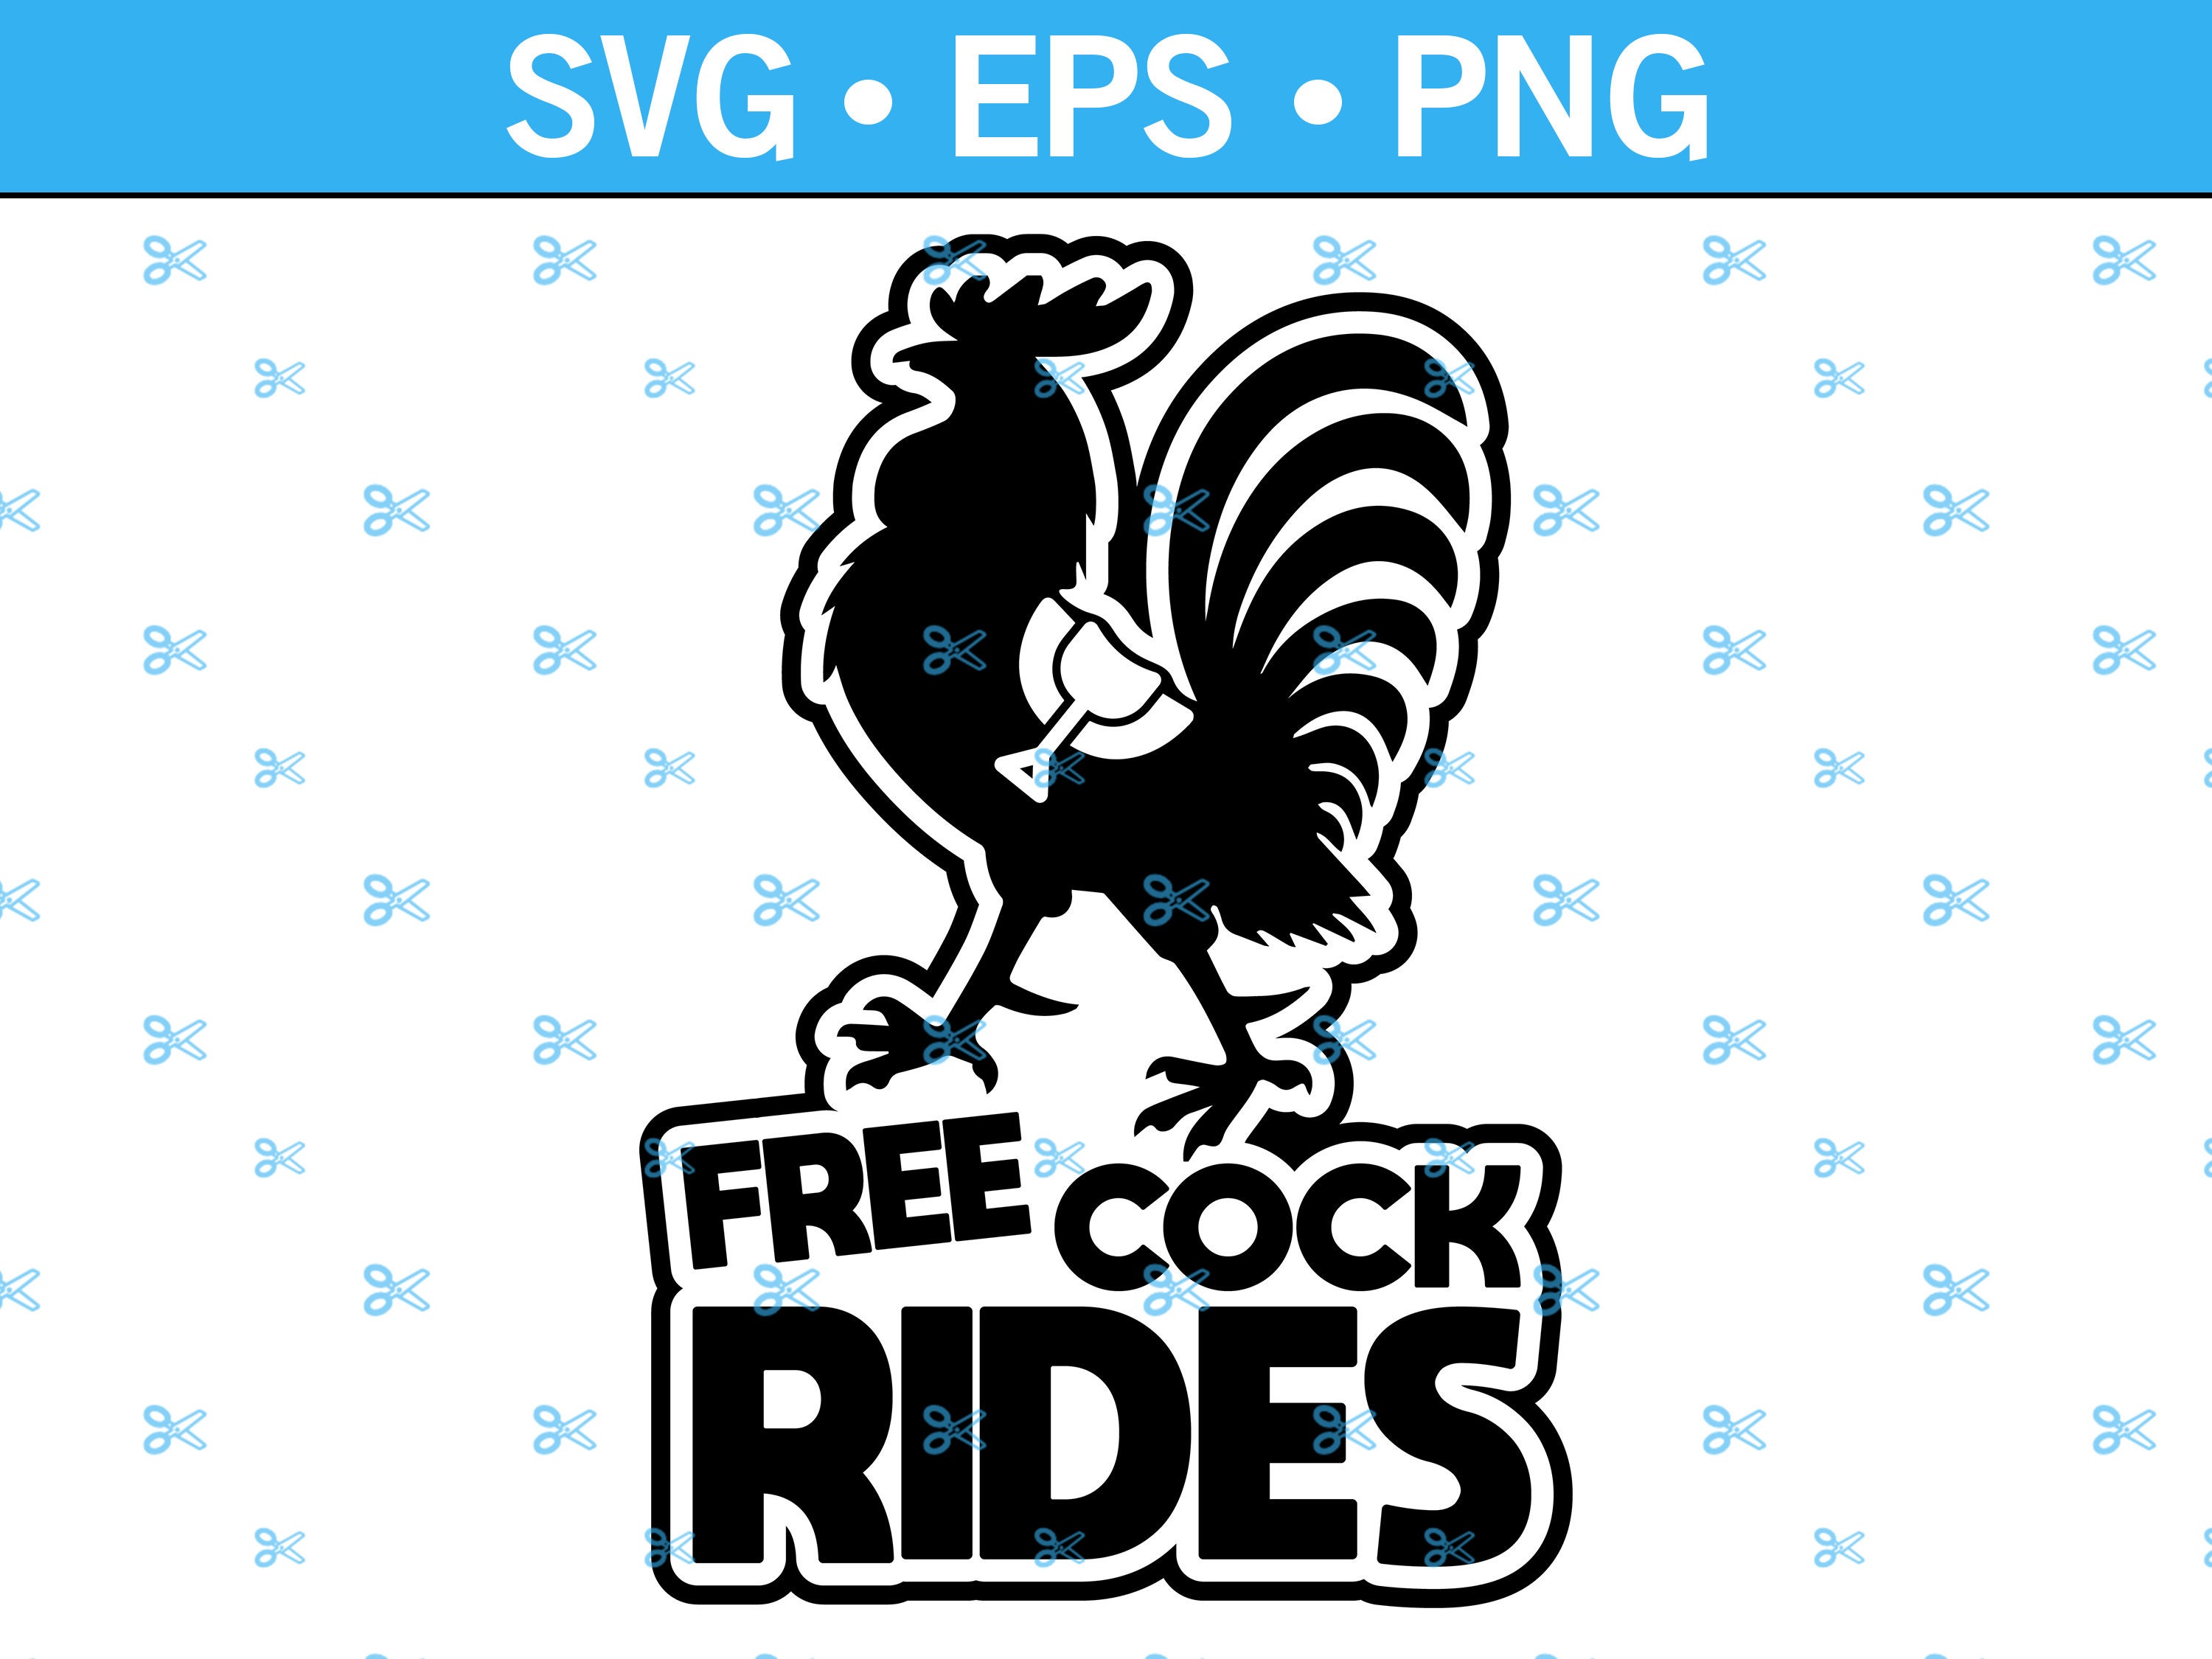 Free Cock Rides Svg Vector Cut File For Cricut Silhouette Etsy Ireland 